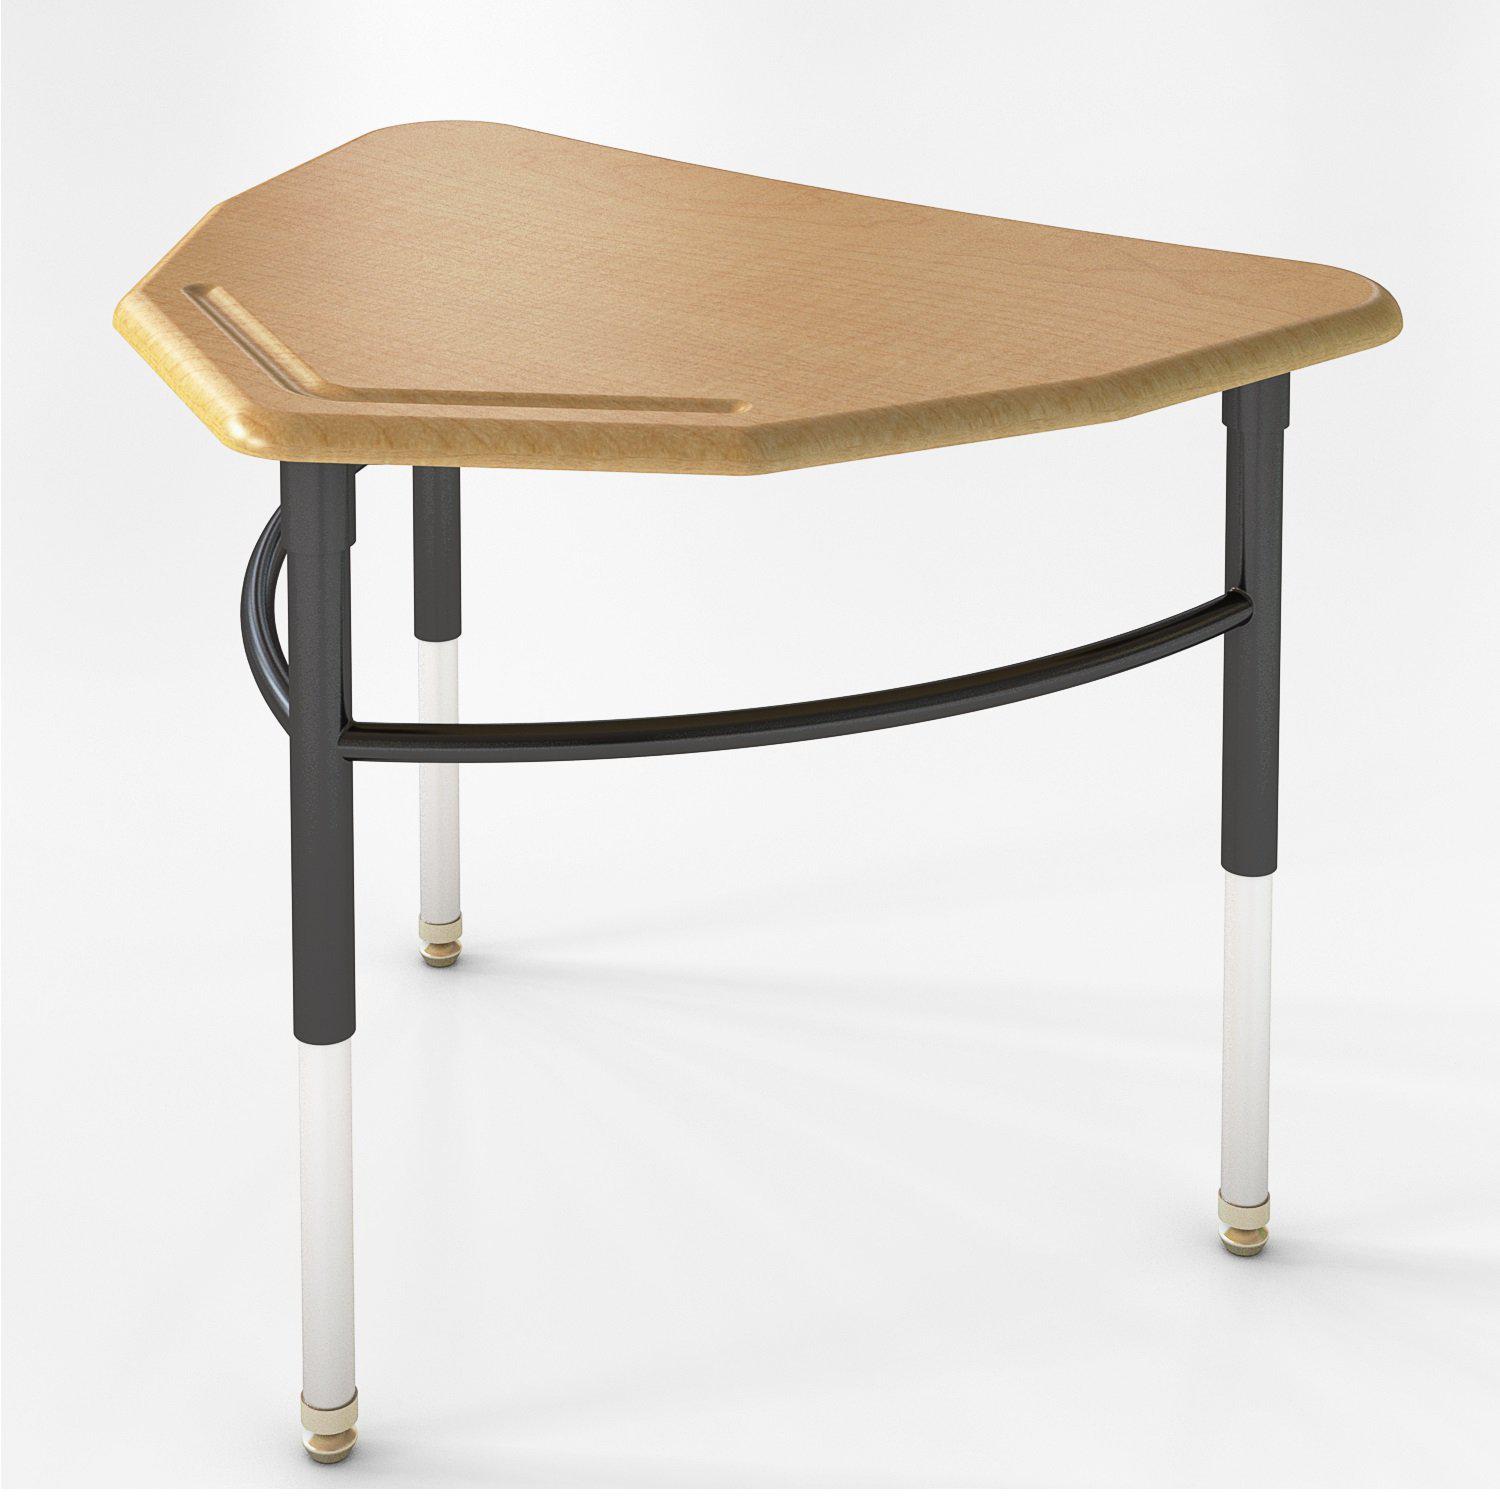 Kaleidoscope Collaborative Learning  Adjustable Height Diamond Desk with Solid Plastic Top